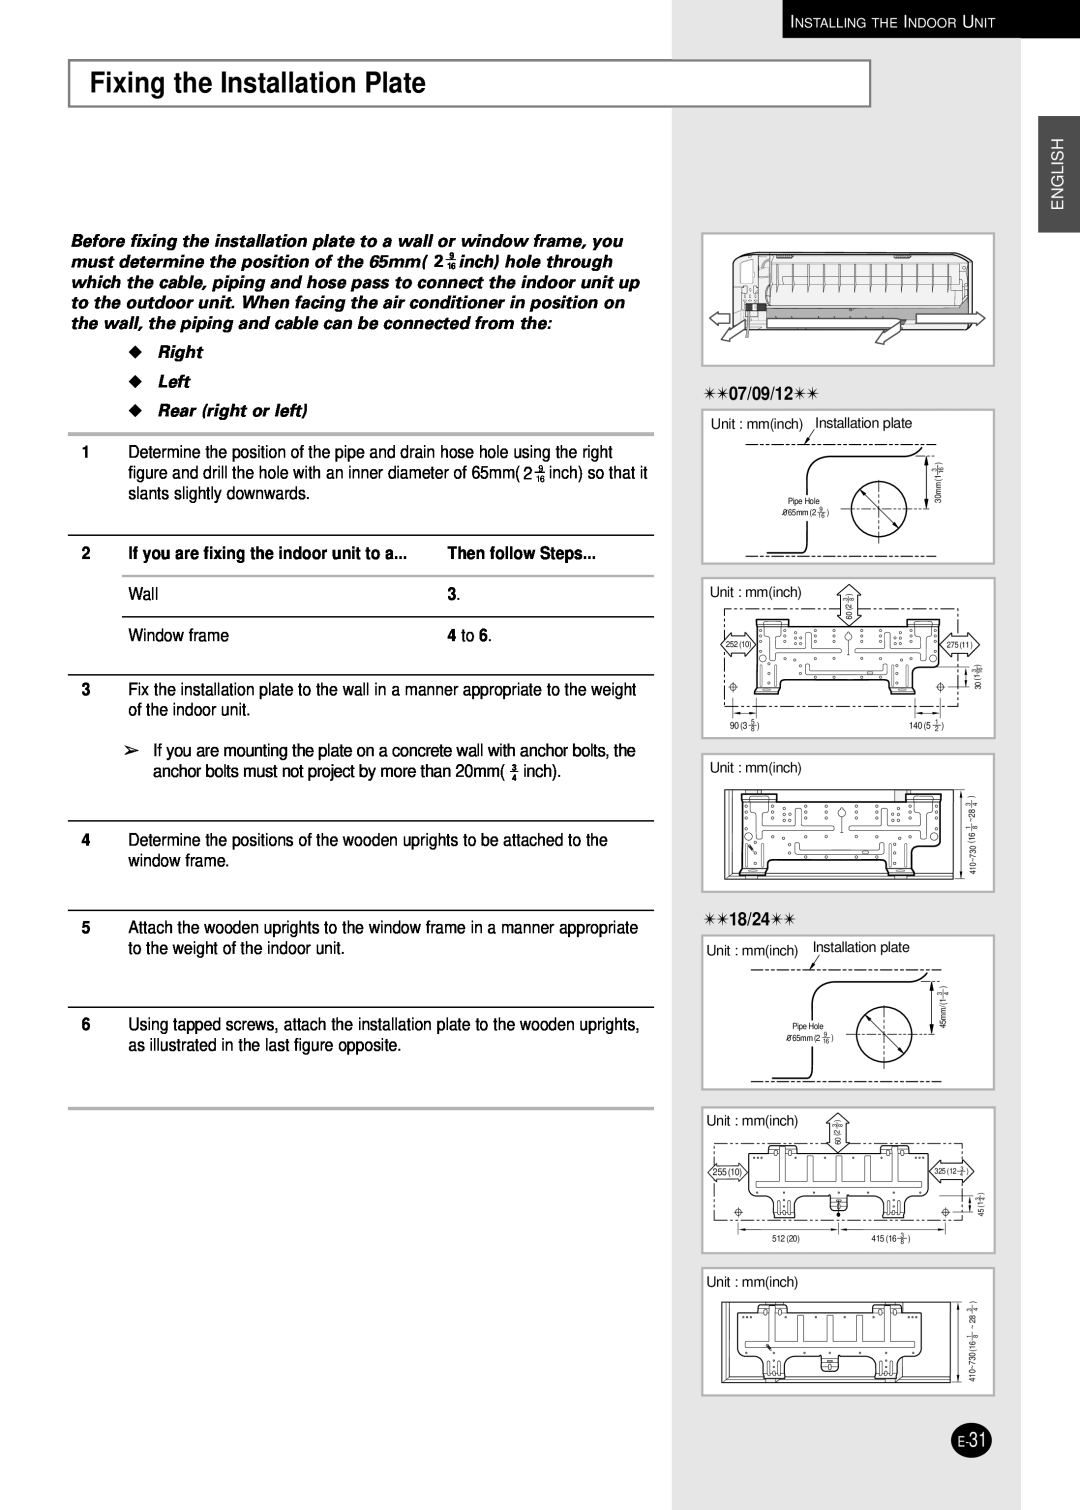 Samsung US18A9(A0)RCD Fixing the Installation Plate, 07/09/12, 18/24, Then follow Steps, Wall, Window frame, 4 to, English 